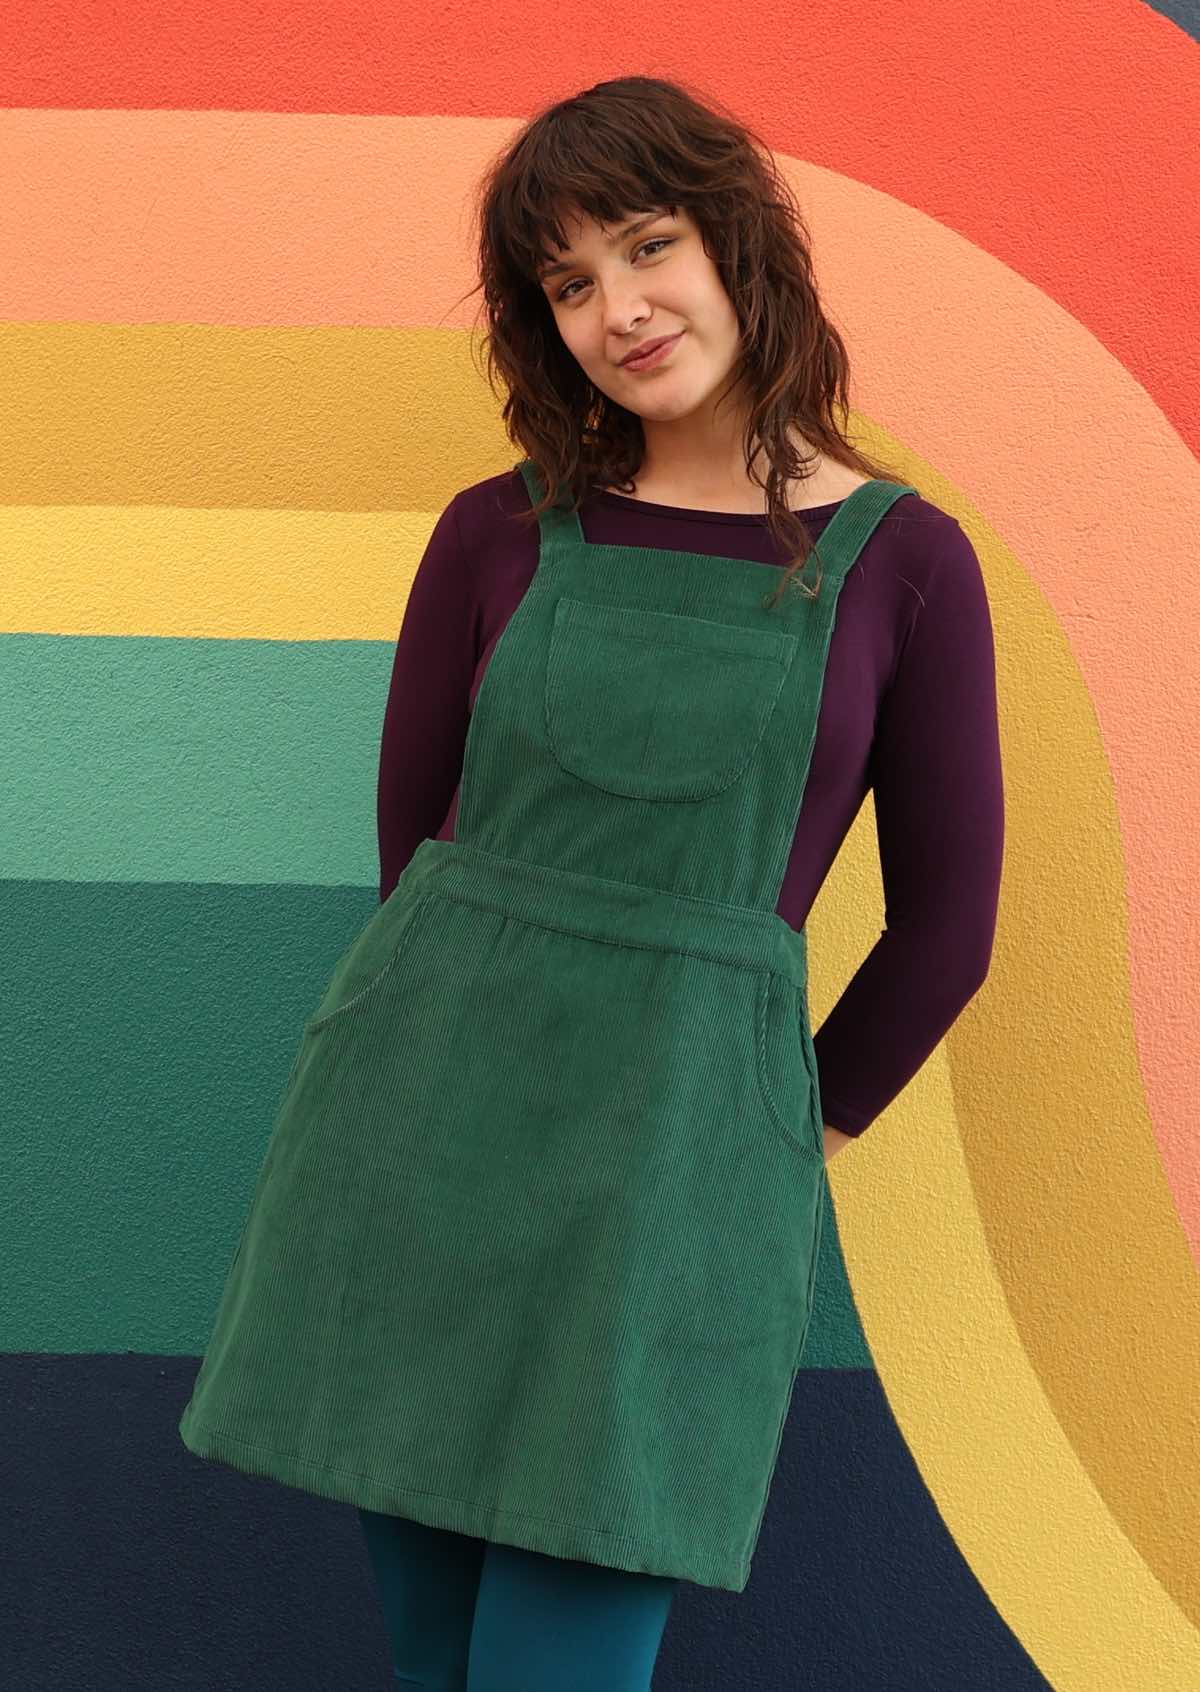 woman wearing green corduroy pinafore over purple top and teal leggings 